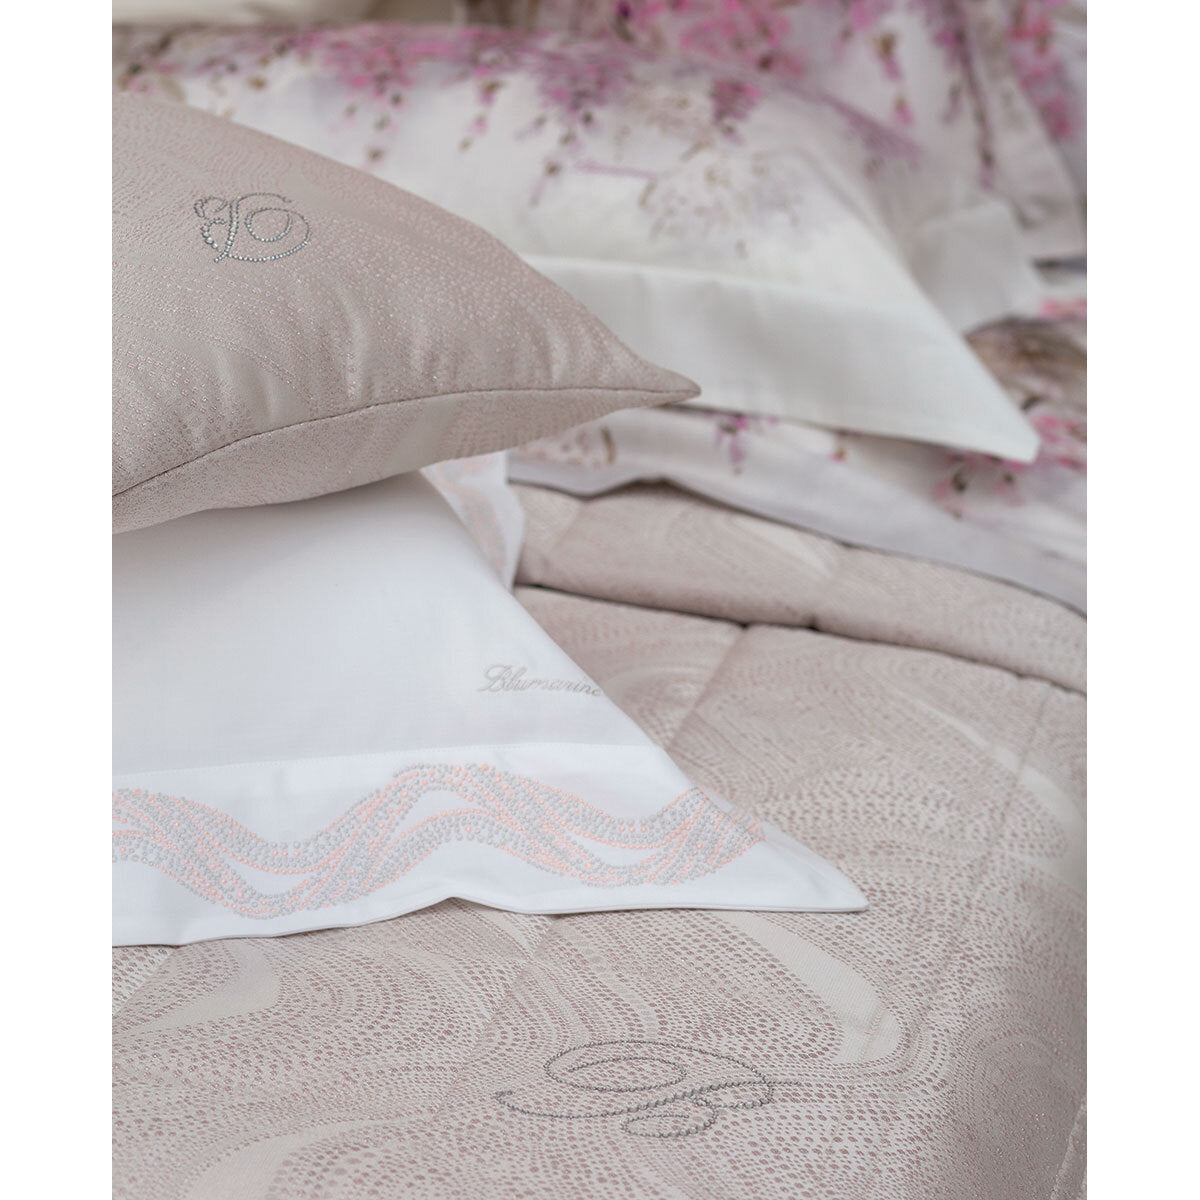 Bed linen set with duvet cover Crystelle Blumarine